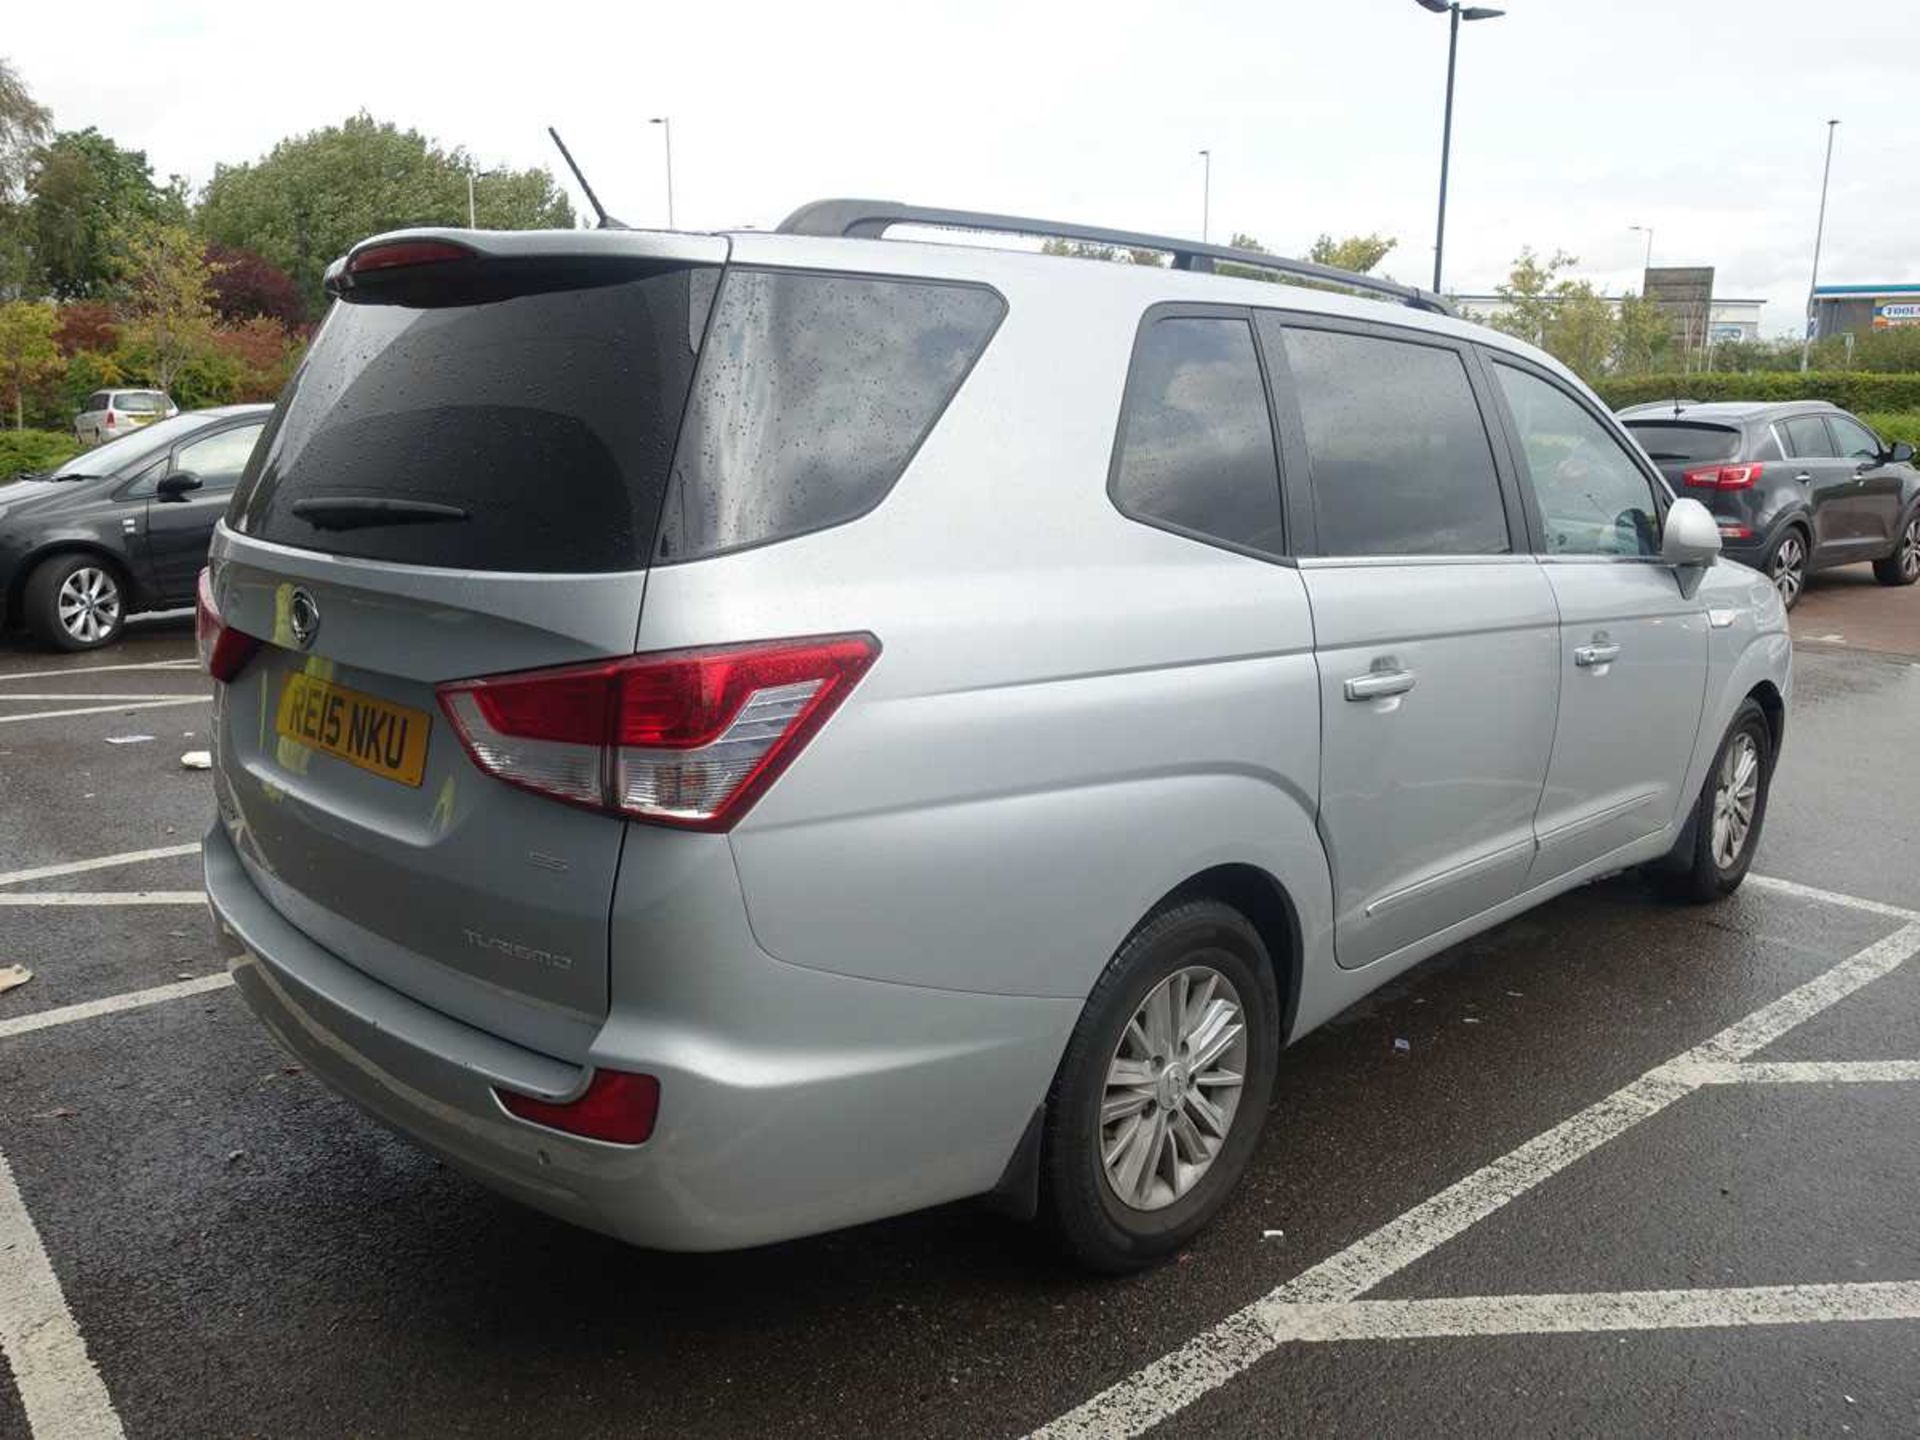 (RE15 NKU) Ssangyong Rodius Turisomo ES auto in silver, first registered 10.06.2015, 5 door MPV, - Image 5 of 12